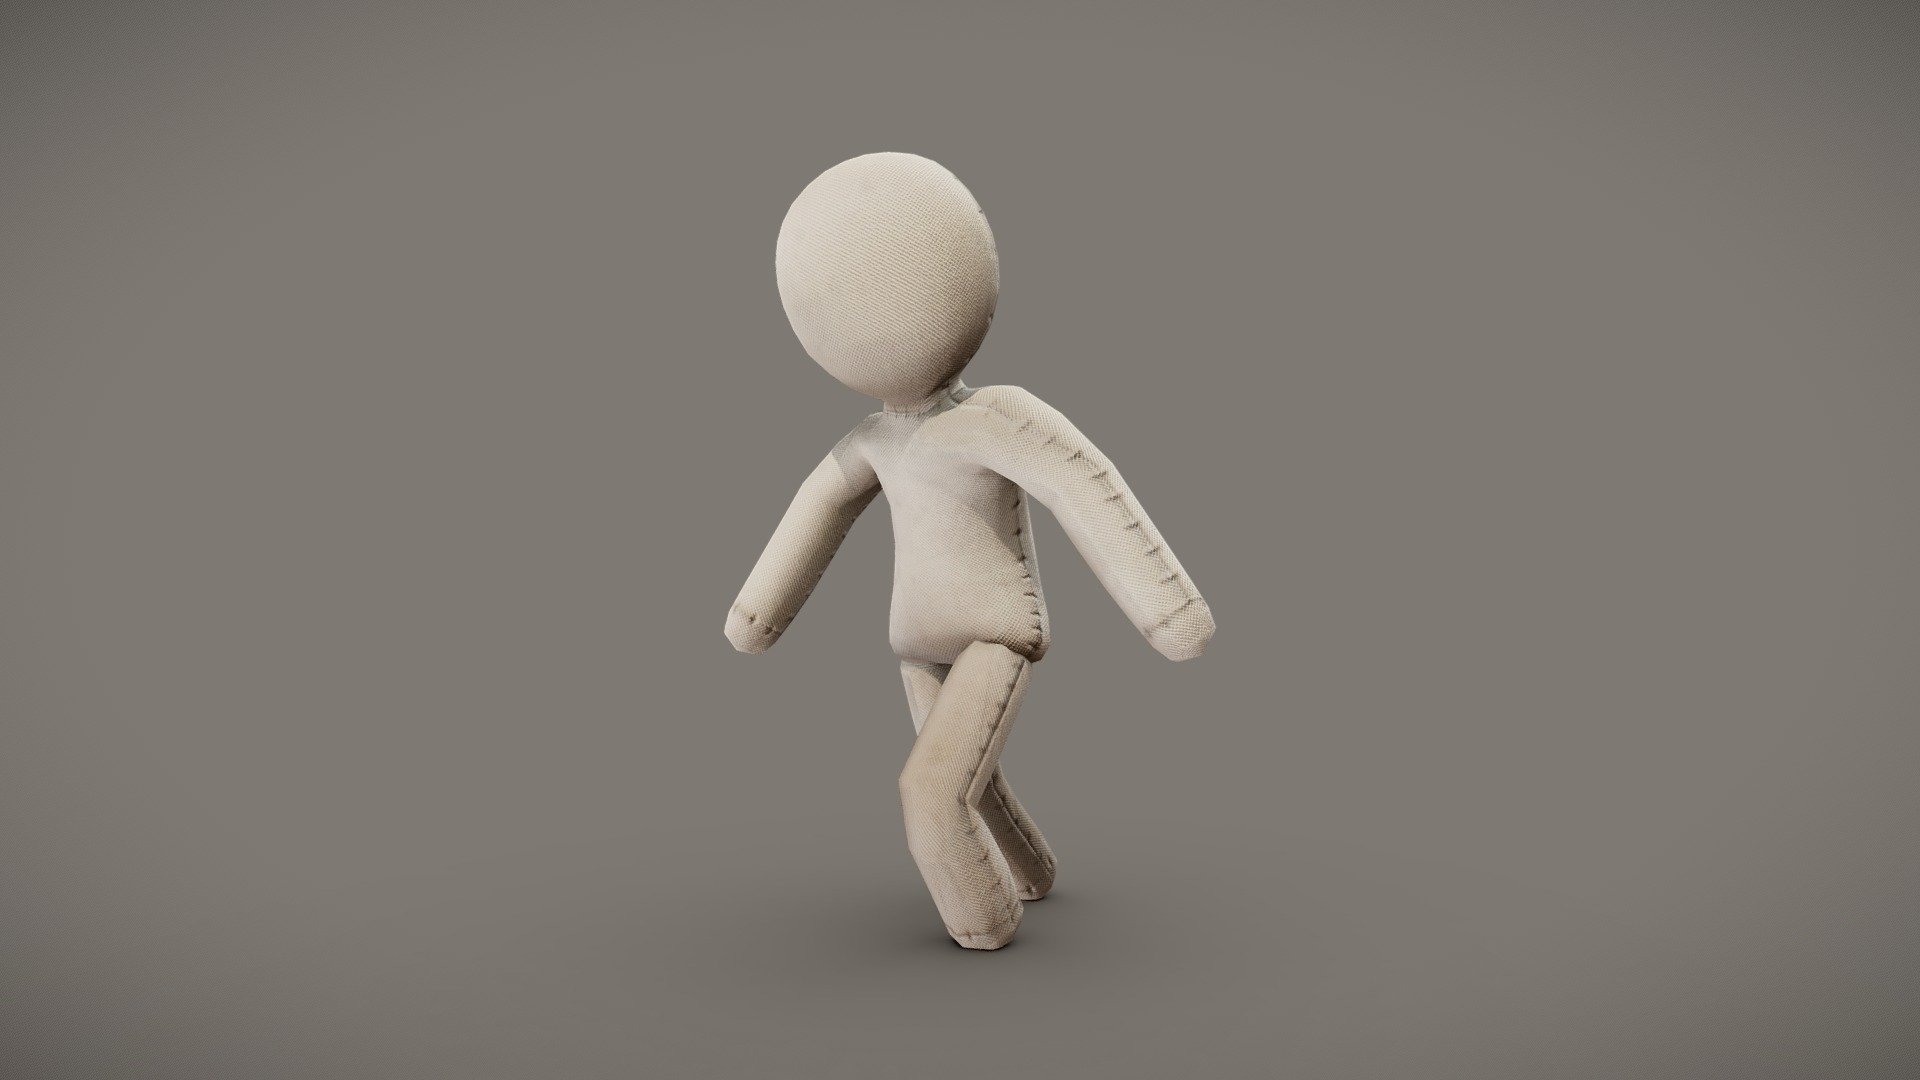 Low Poly Rag Doll for your renders and games

Rig Information:

Rigged mesh

Animation: none

Textures:

Diffuse color, Roughness, Normal, AO

All textures are 2K

Files Formats:

Blend

Fbx

Obj - Low Poly Rag Doll - Buy Royalty Free 3D model by Vanessa Araújo (@vanessa3d) 3d model